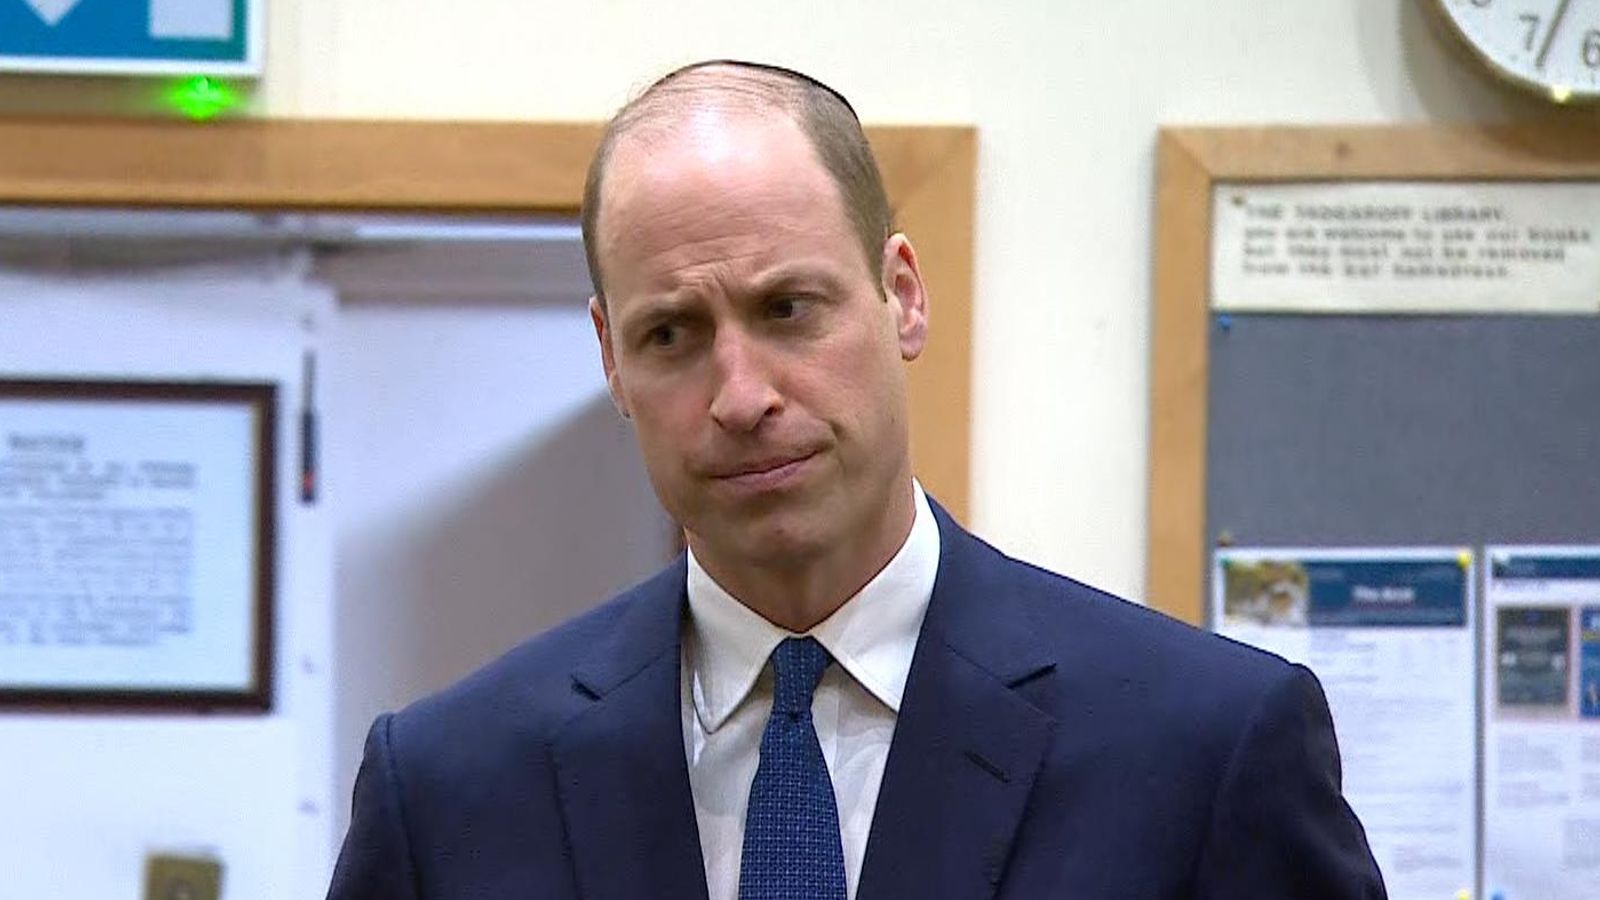 william and kate 'extremely concerned' about rise of antisemitism in uk